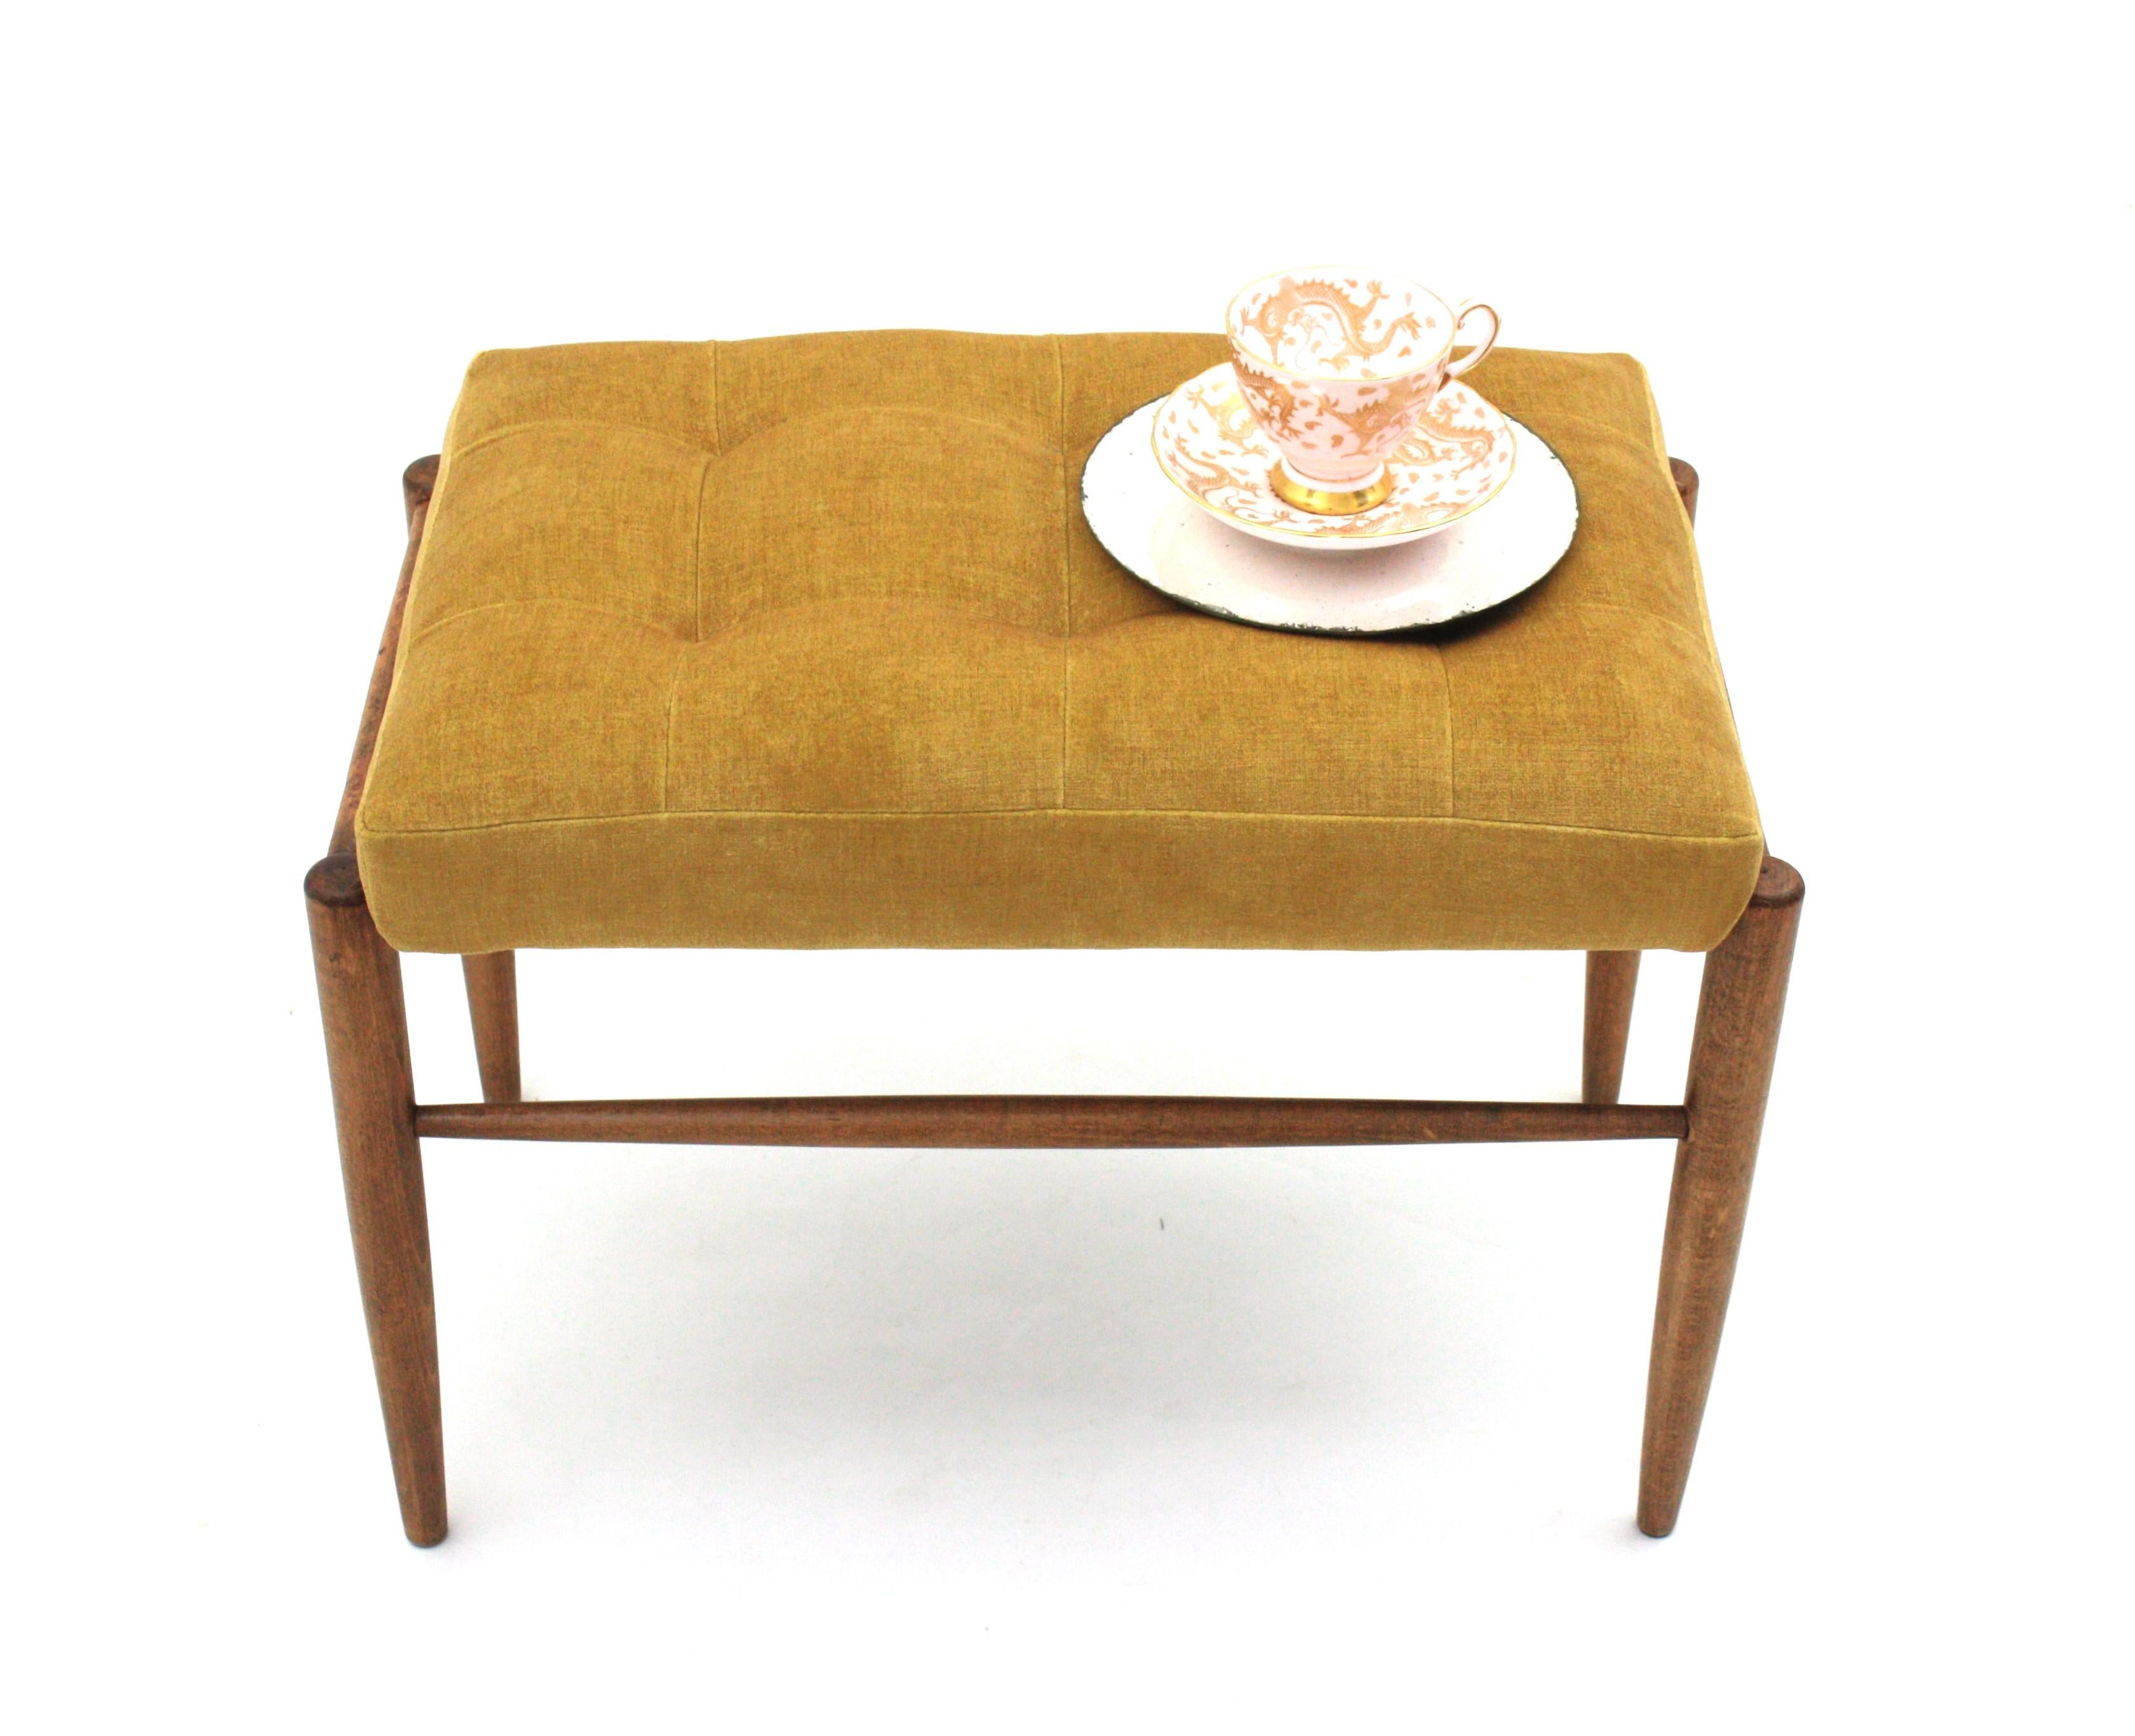 Eyecatching Scandinavian Style Beechwood Stool with Mustard Yellow Velvet Upholstery, 1950s
This Mid-Century Modernist rectangular stool or small bench was handcrafted in Spain inspired by scandinavian designs.
It has a clean design with stretchers